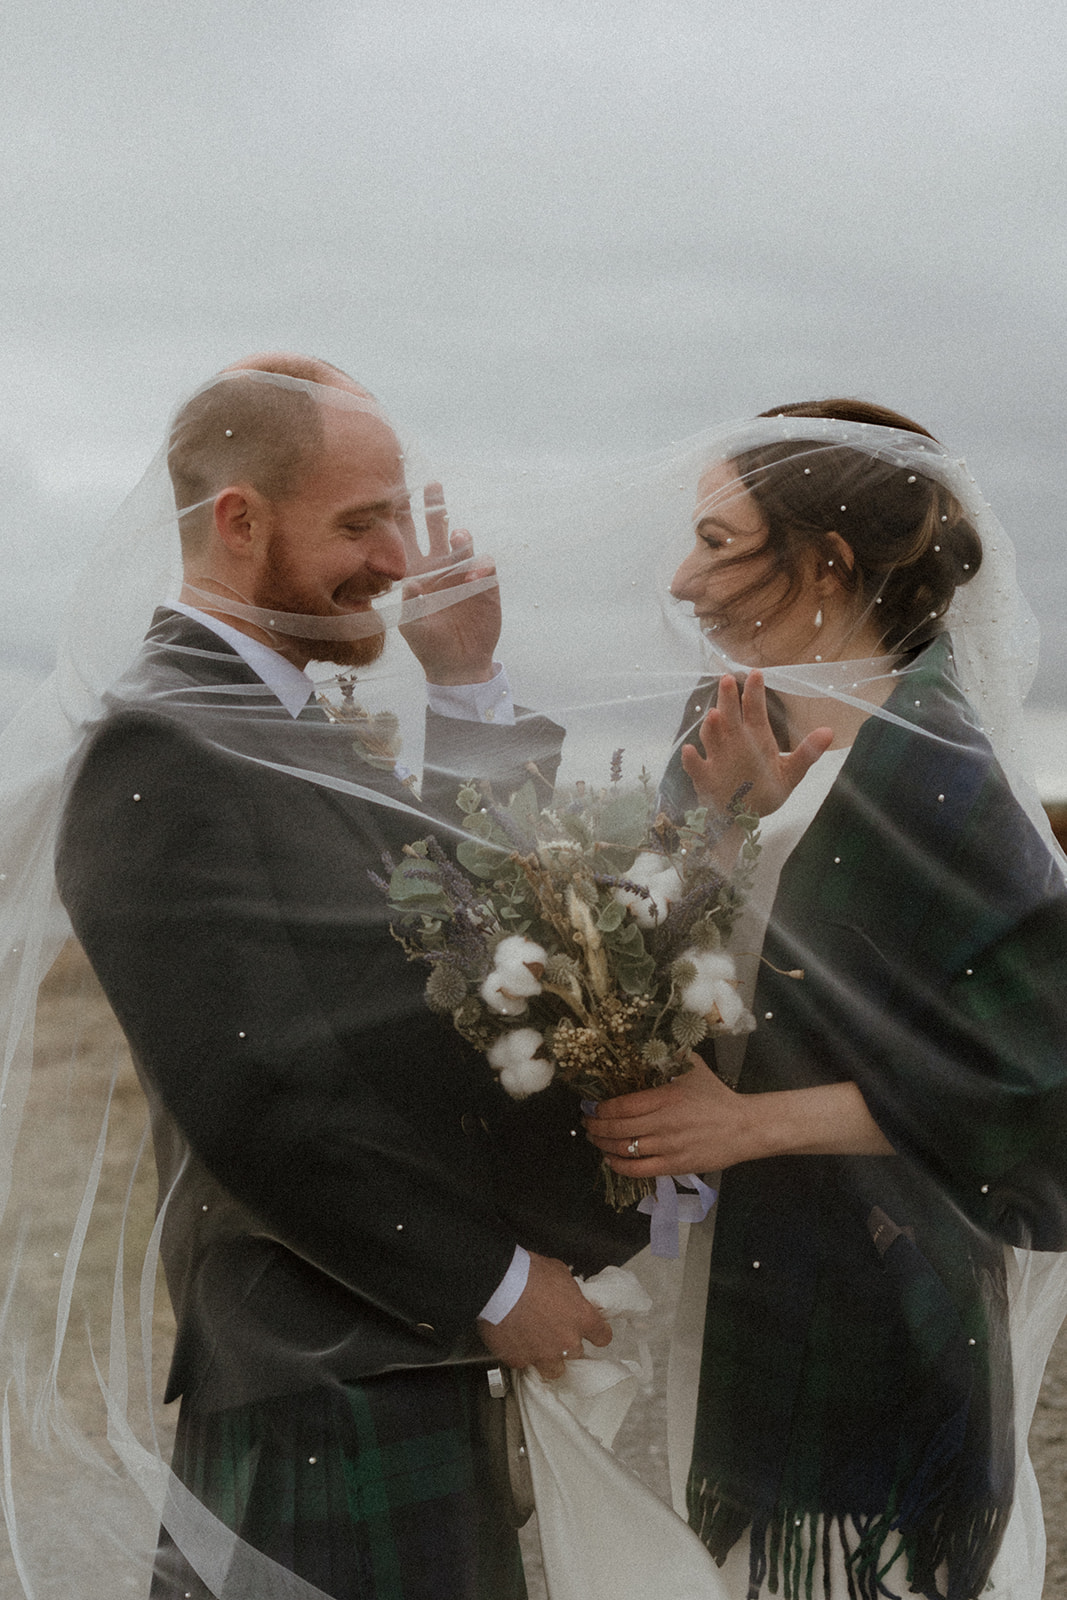 A moment of fun between Bride and Groom under the veil after their Unforgettable Intimate Wedding in the beautiful Shetland Islands